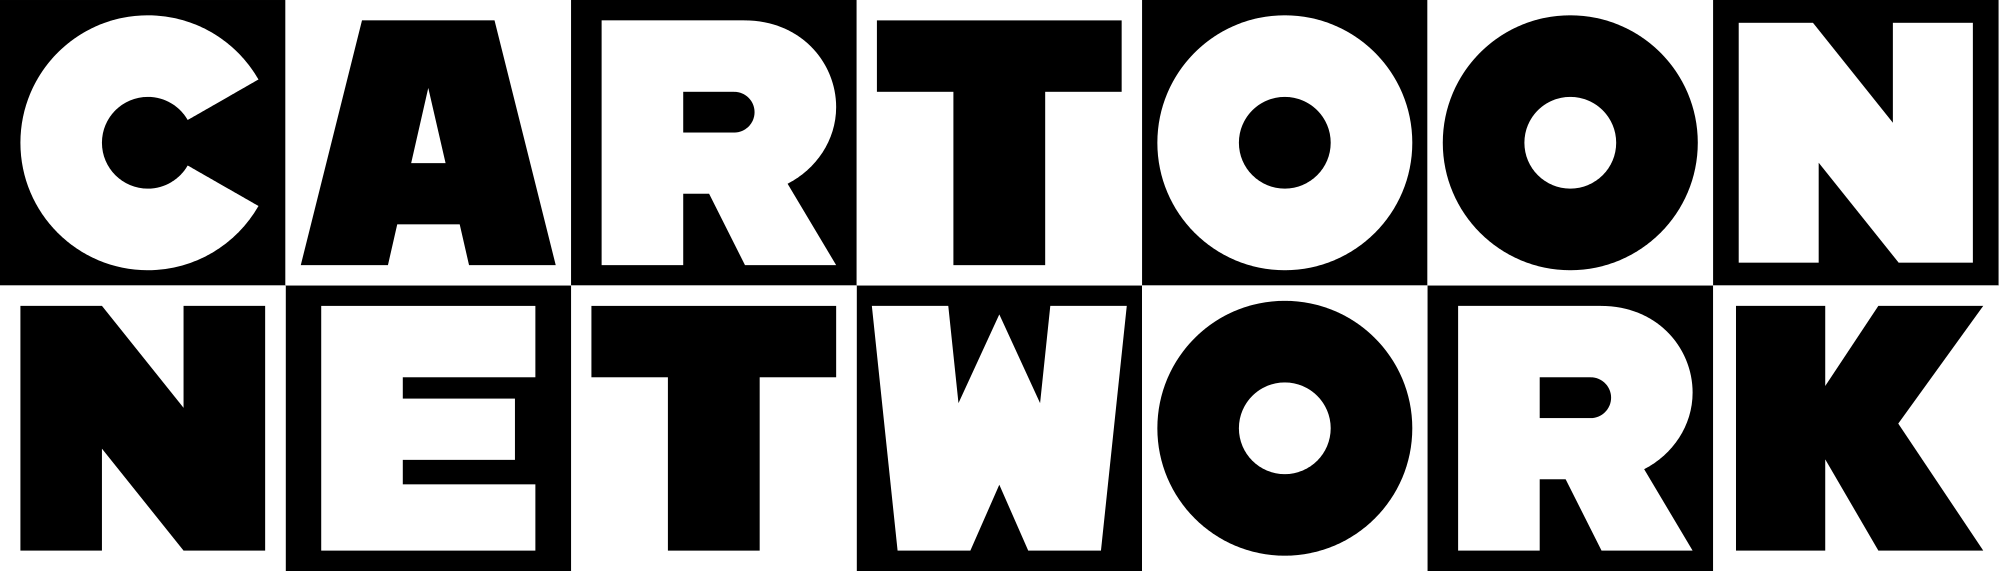 Black and White Checkerboard Logo - File:Cartoon Network extended logo 2010.svg - Wikimedia Commons